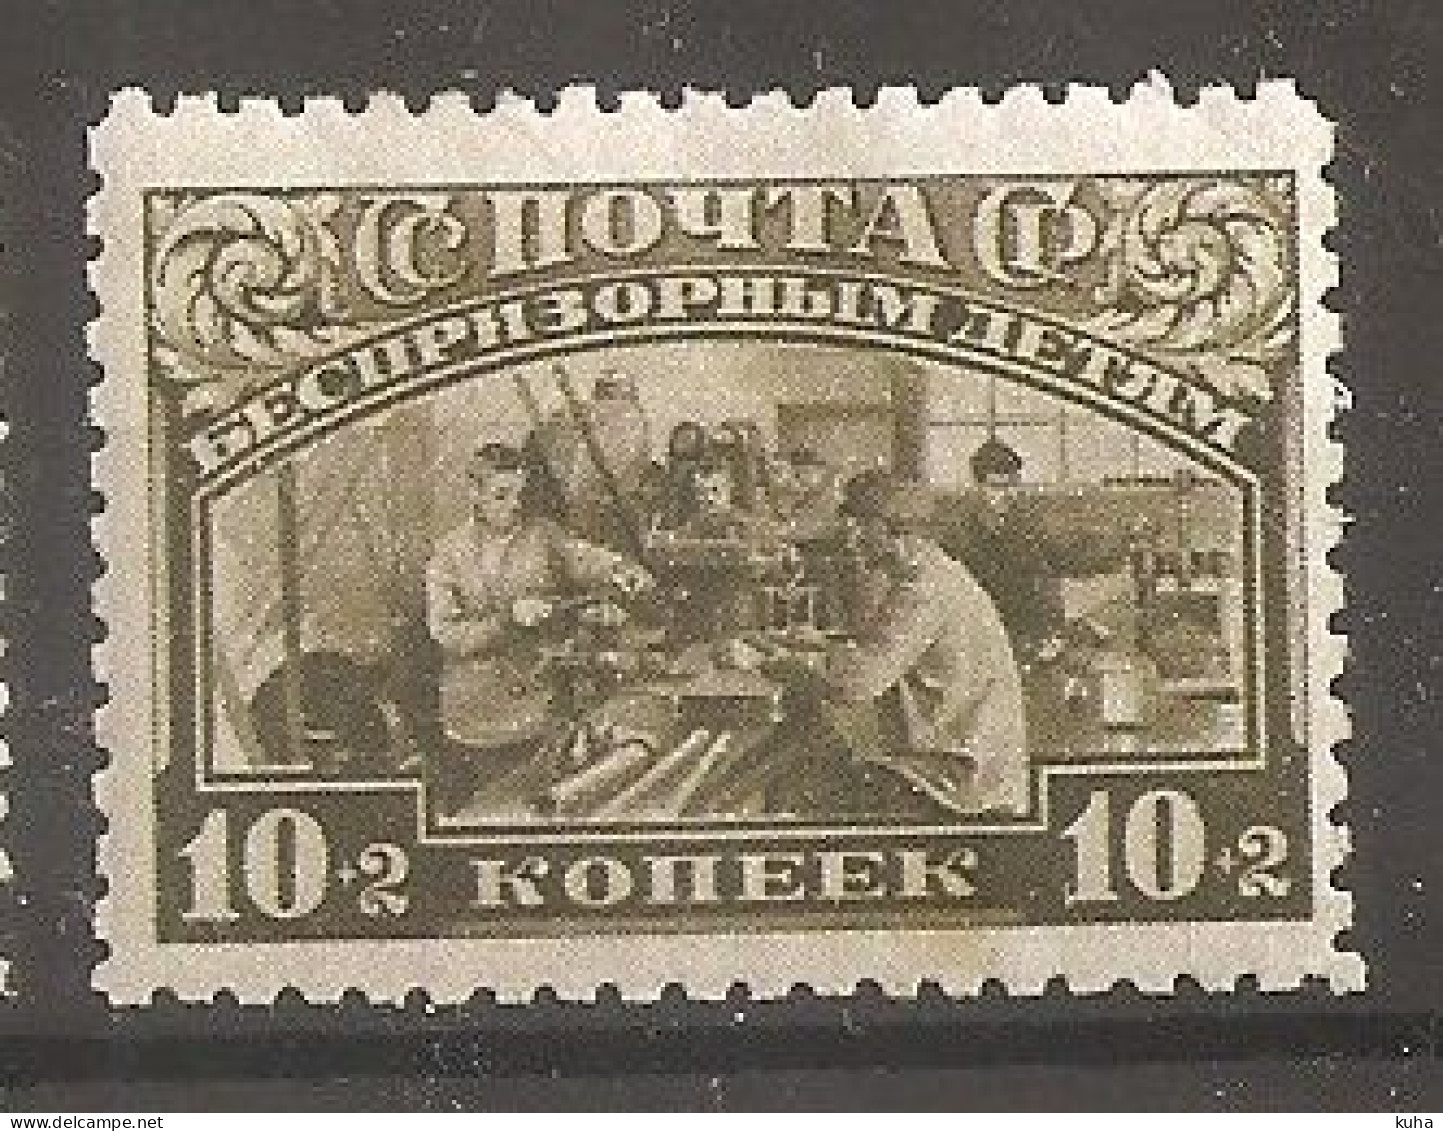 Russia Russie Russland USSR 1929 MH - Neufs